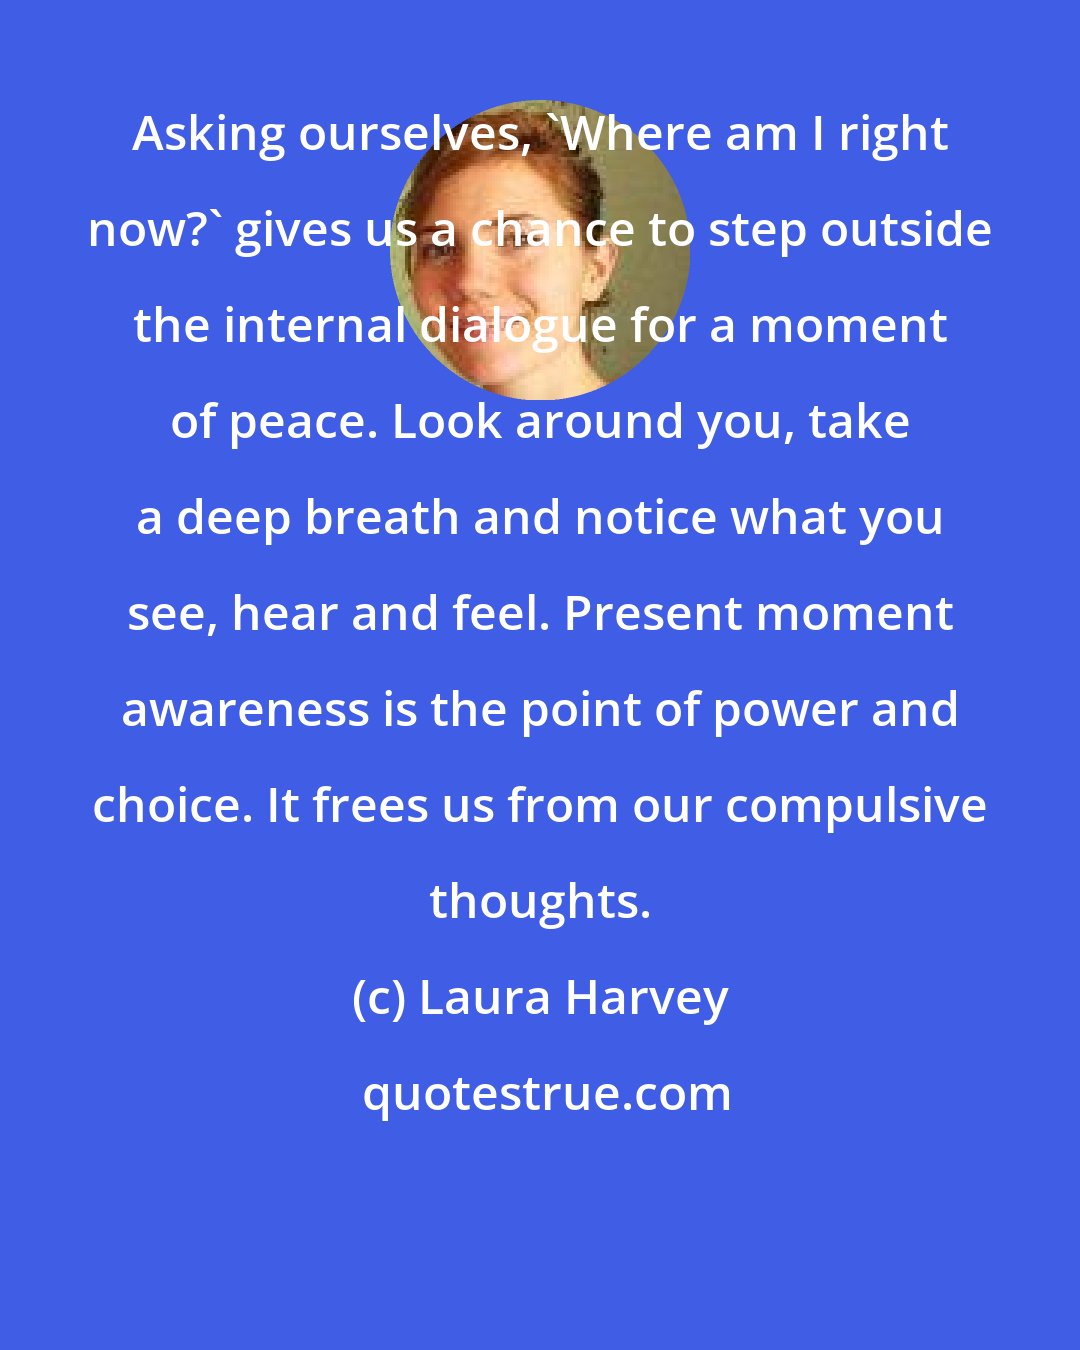 Laura Harvey: Asking ourselves, 'Where am I right now?' gives us a chance to step outside the internal dialogue for a moment of peace. Look around you, take a deep breath and notice what you see, hear and feel. Present moment awareness is the point of power and choice. It frees us from our compulsive thoughts.